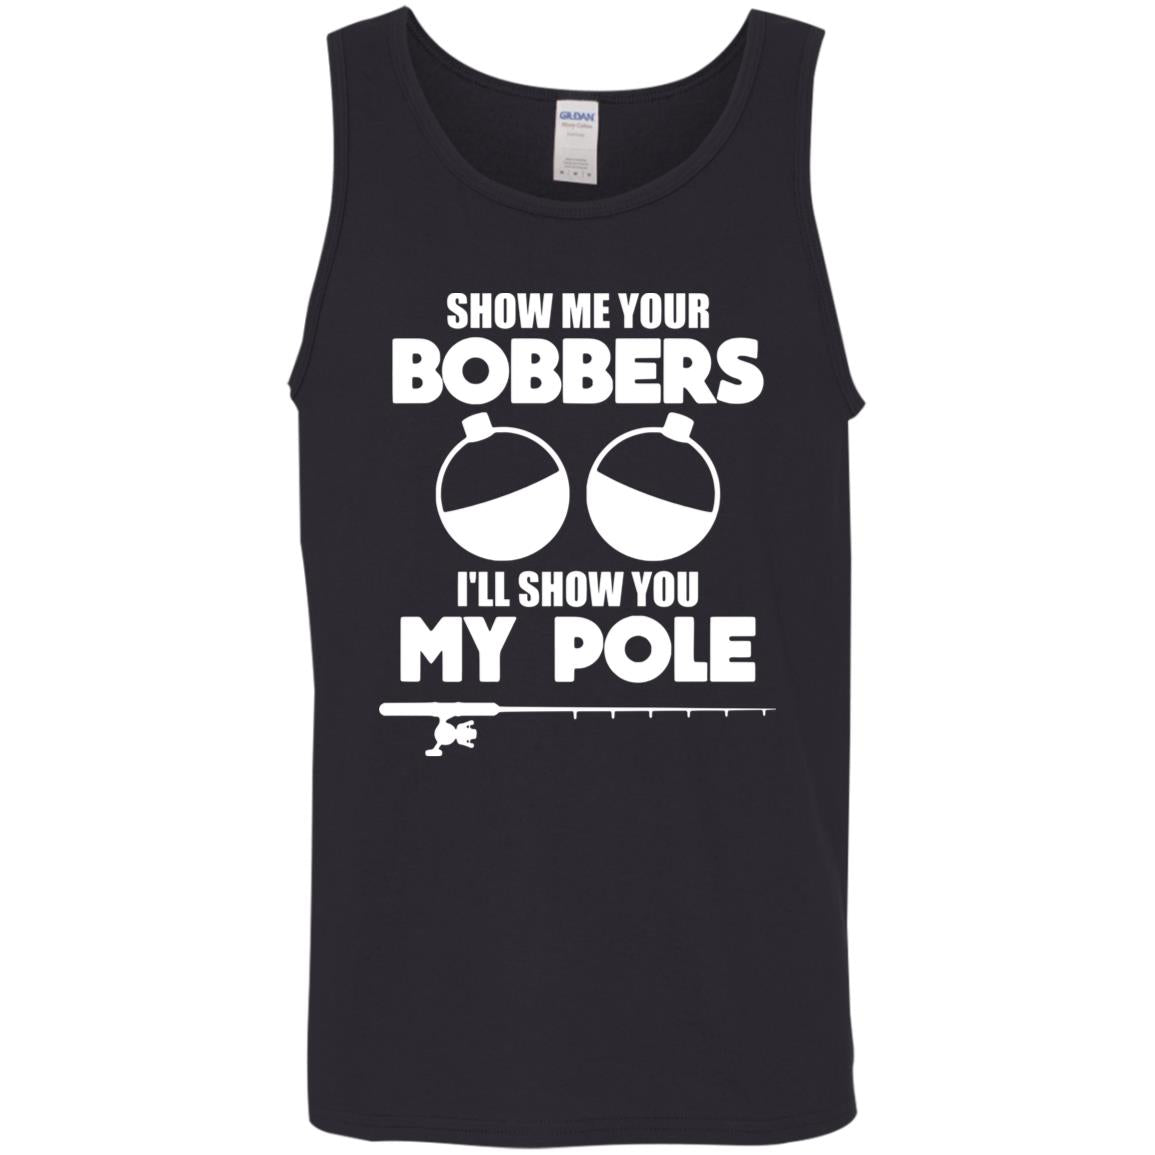 HRCL FL - Show Me Your Bobbers I'll Show You My Pole - 2 Sided G520 Cotton Tank Top 5.3 oz.